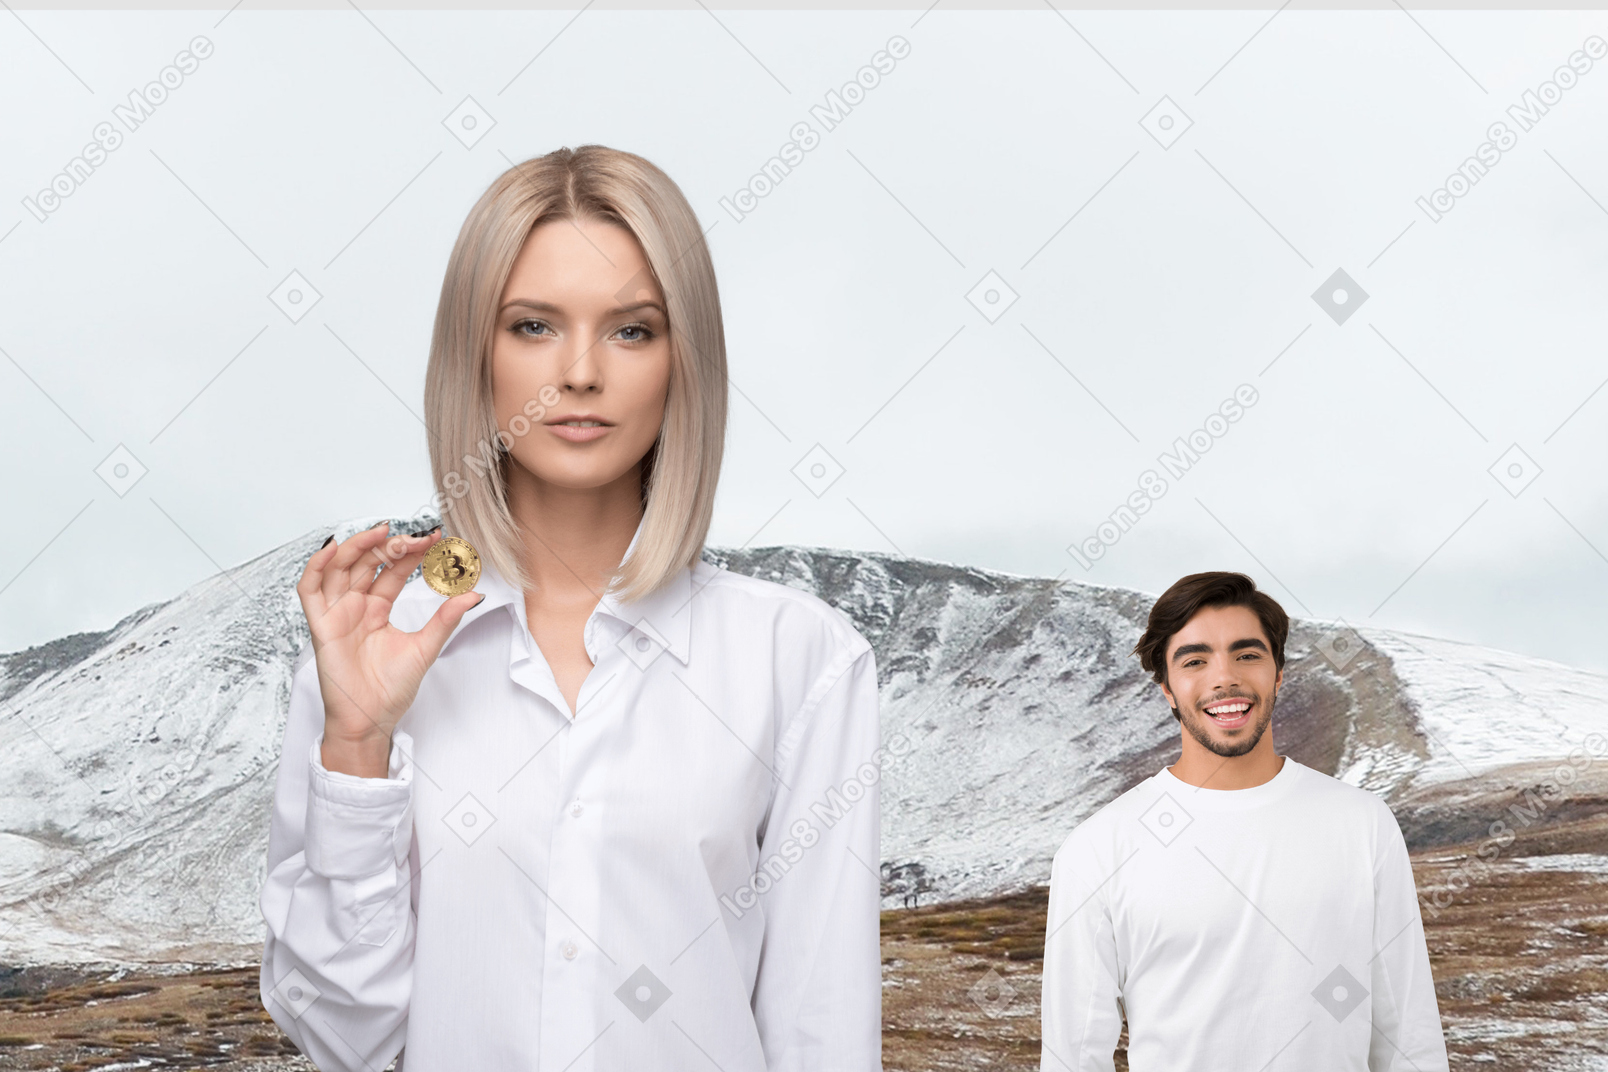 A man standing next to a woman in a white shirt